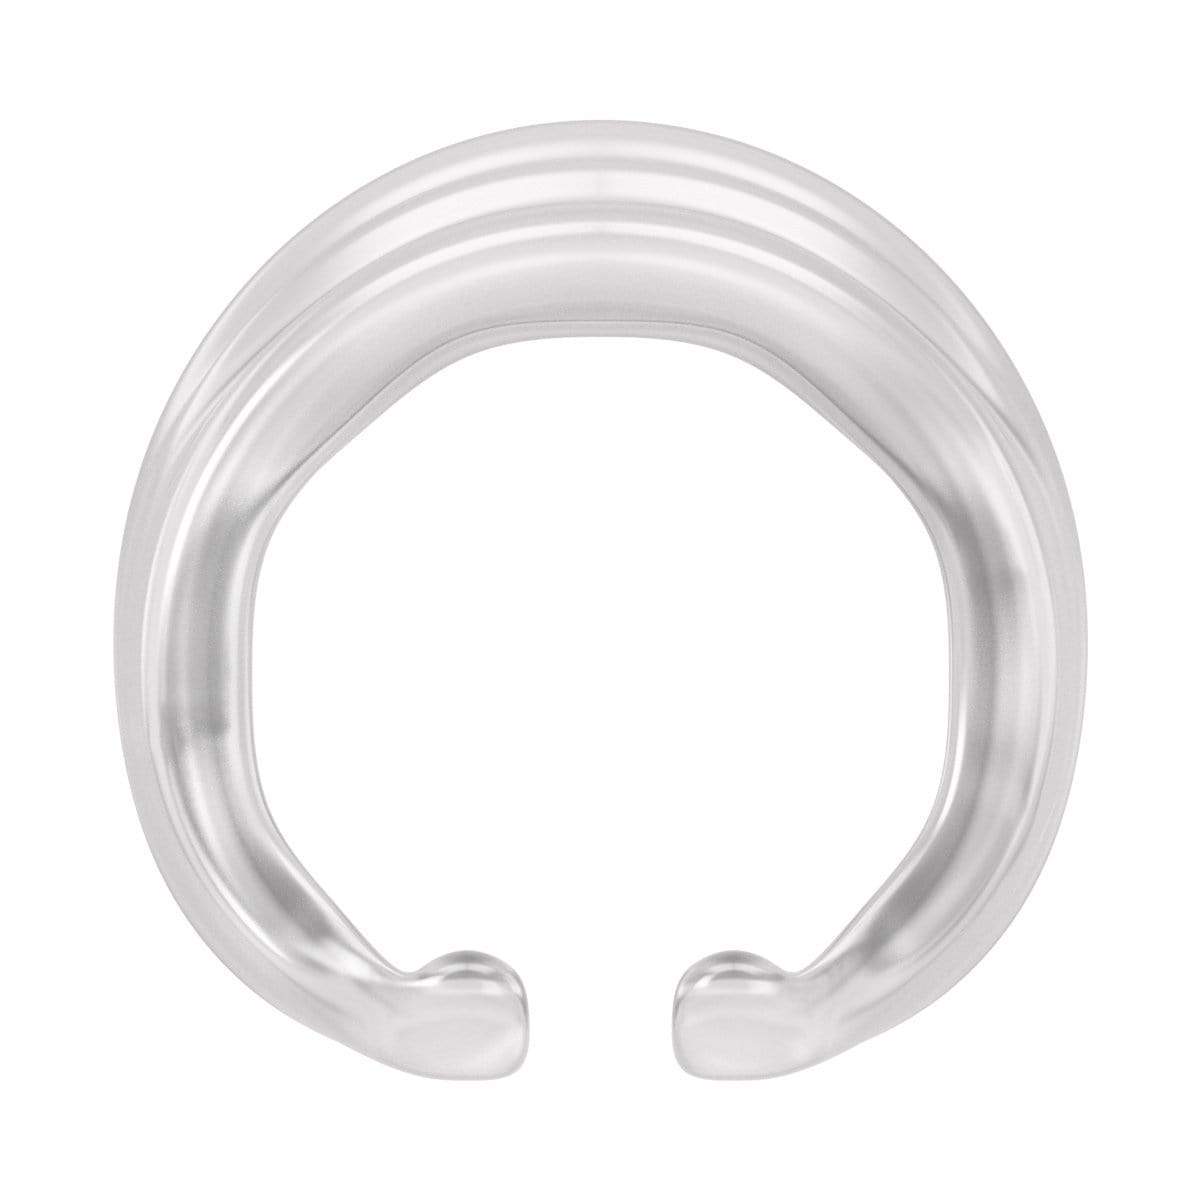 SSI Japan - My Peace Wide Soft Night Size S Correction Cock Ring (Clear) Cock Ring (Non Vibration) 4582137934114 CherryAffairs